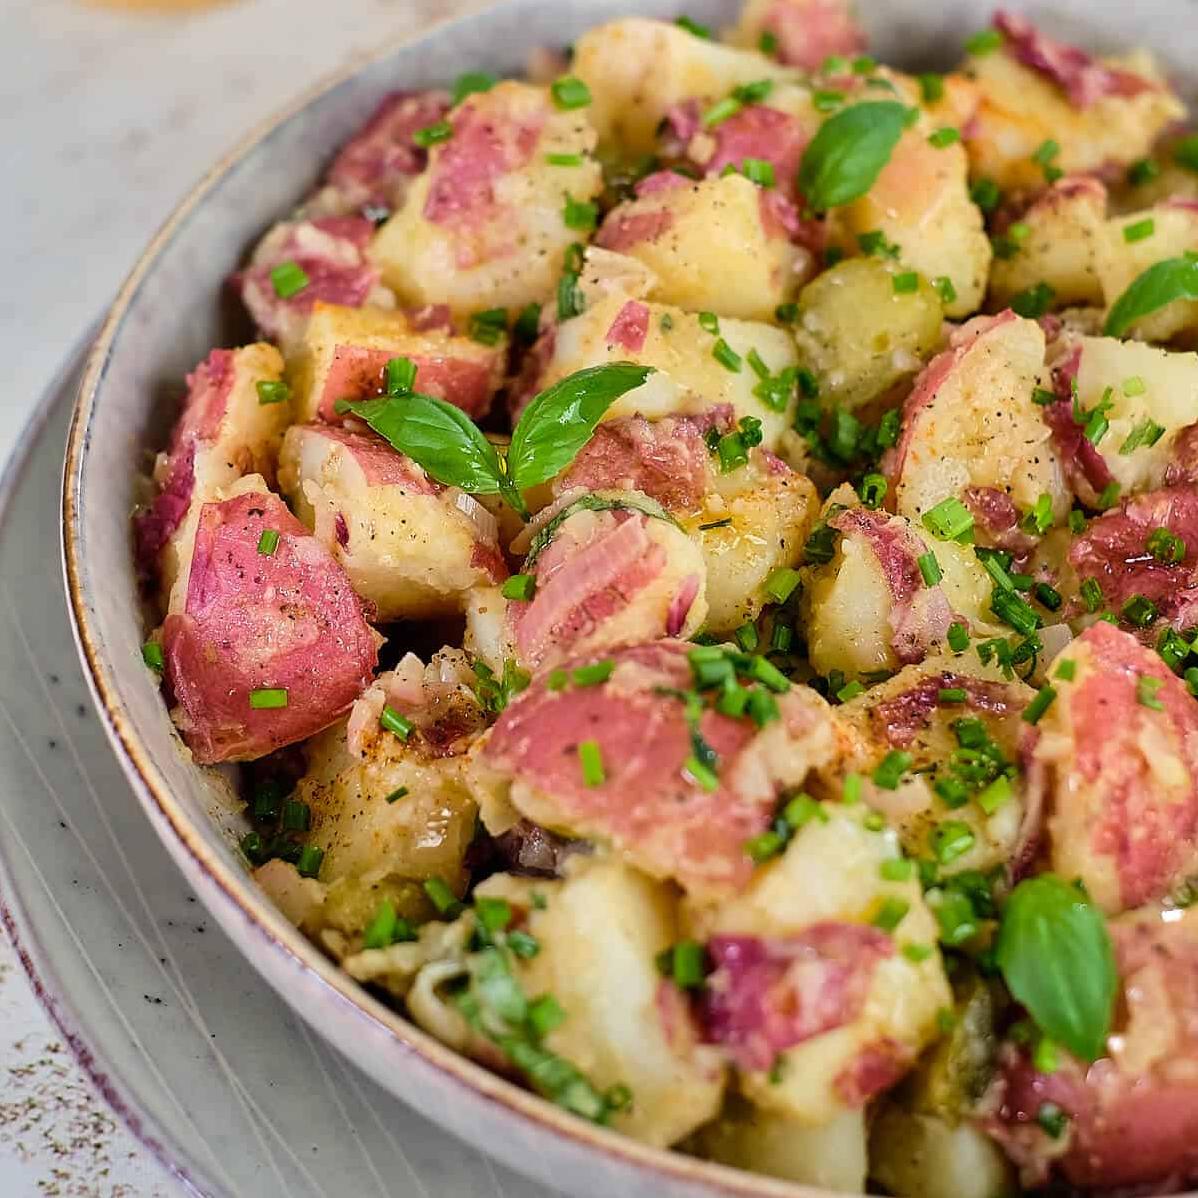  With its smoky and bold flavors, this vegetarian German potato salad is a crowd-pleaser!